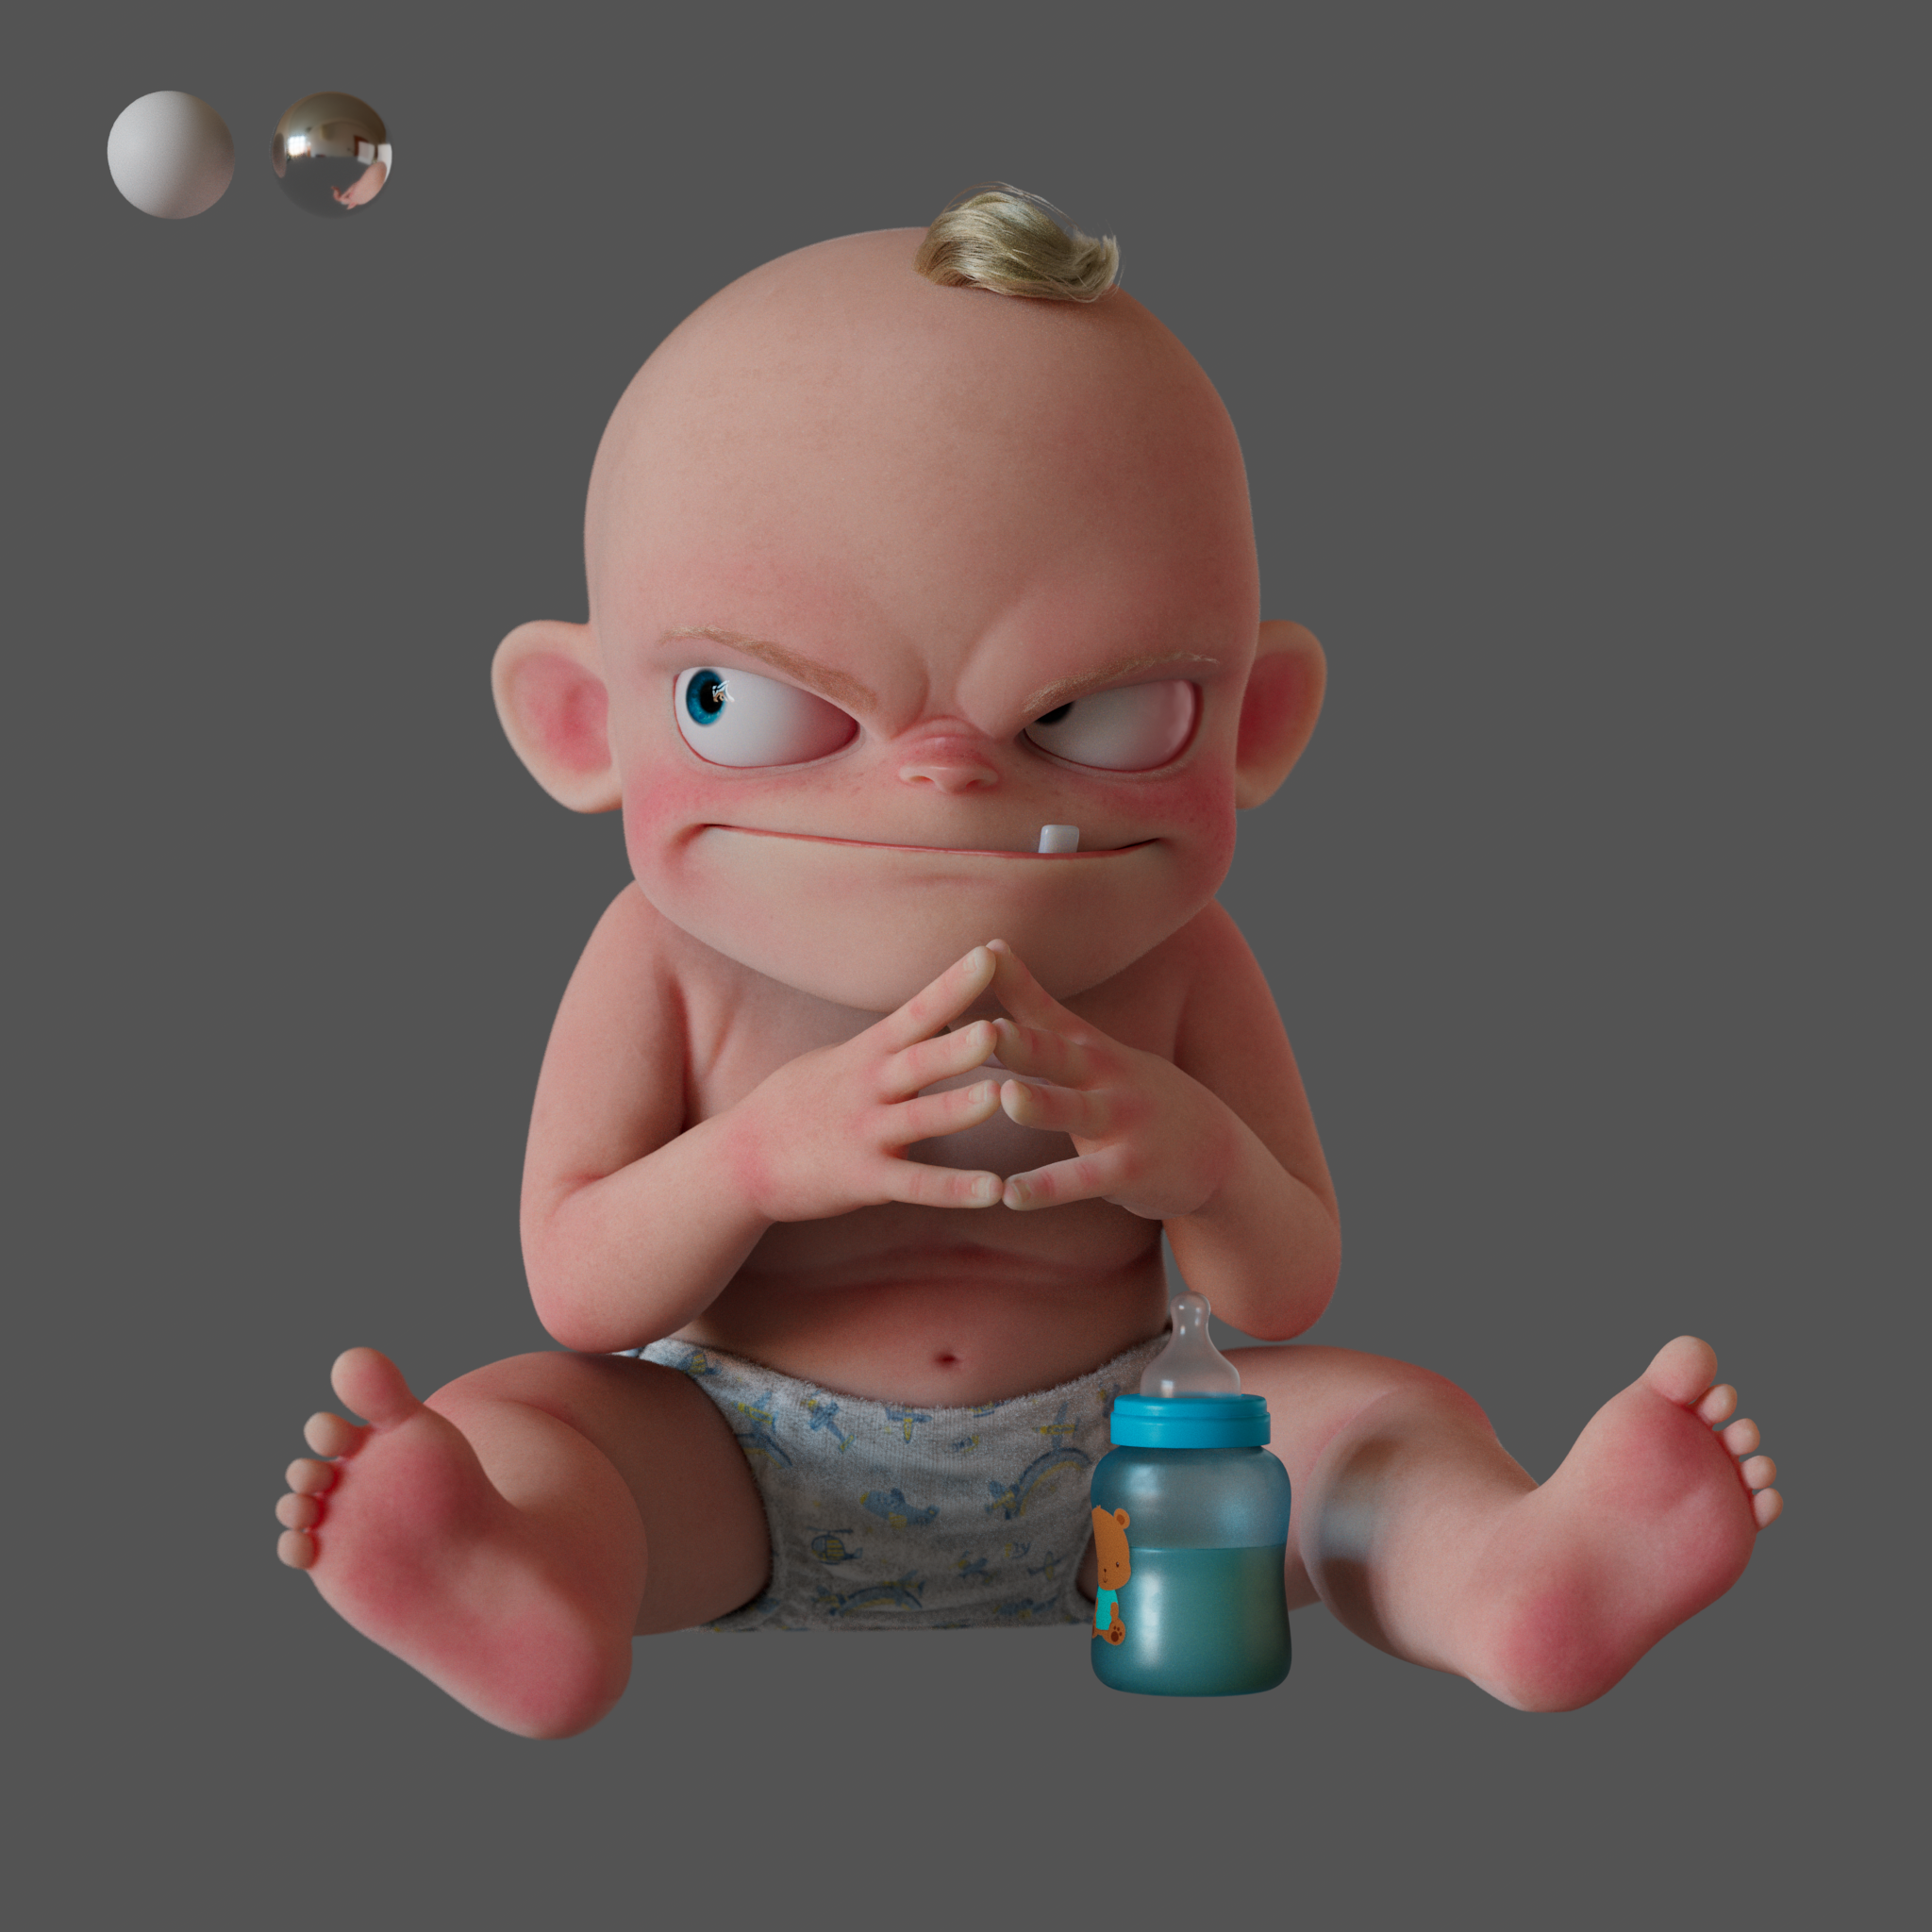 Bad Baby - ZBrushCentral